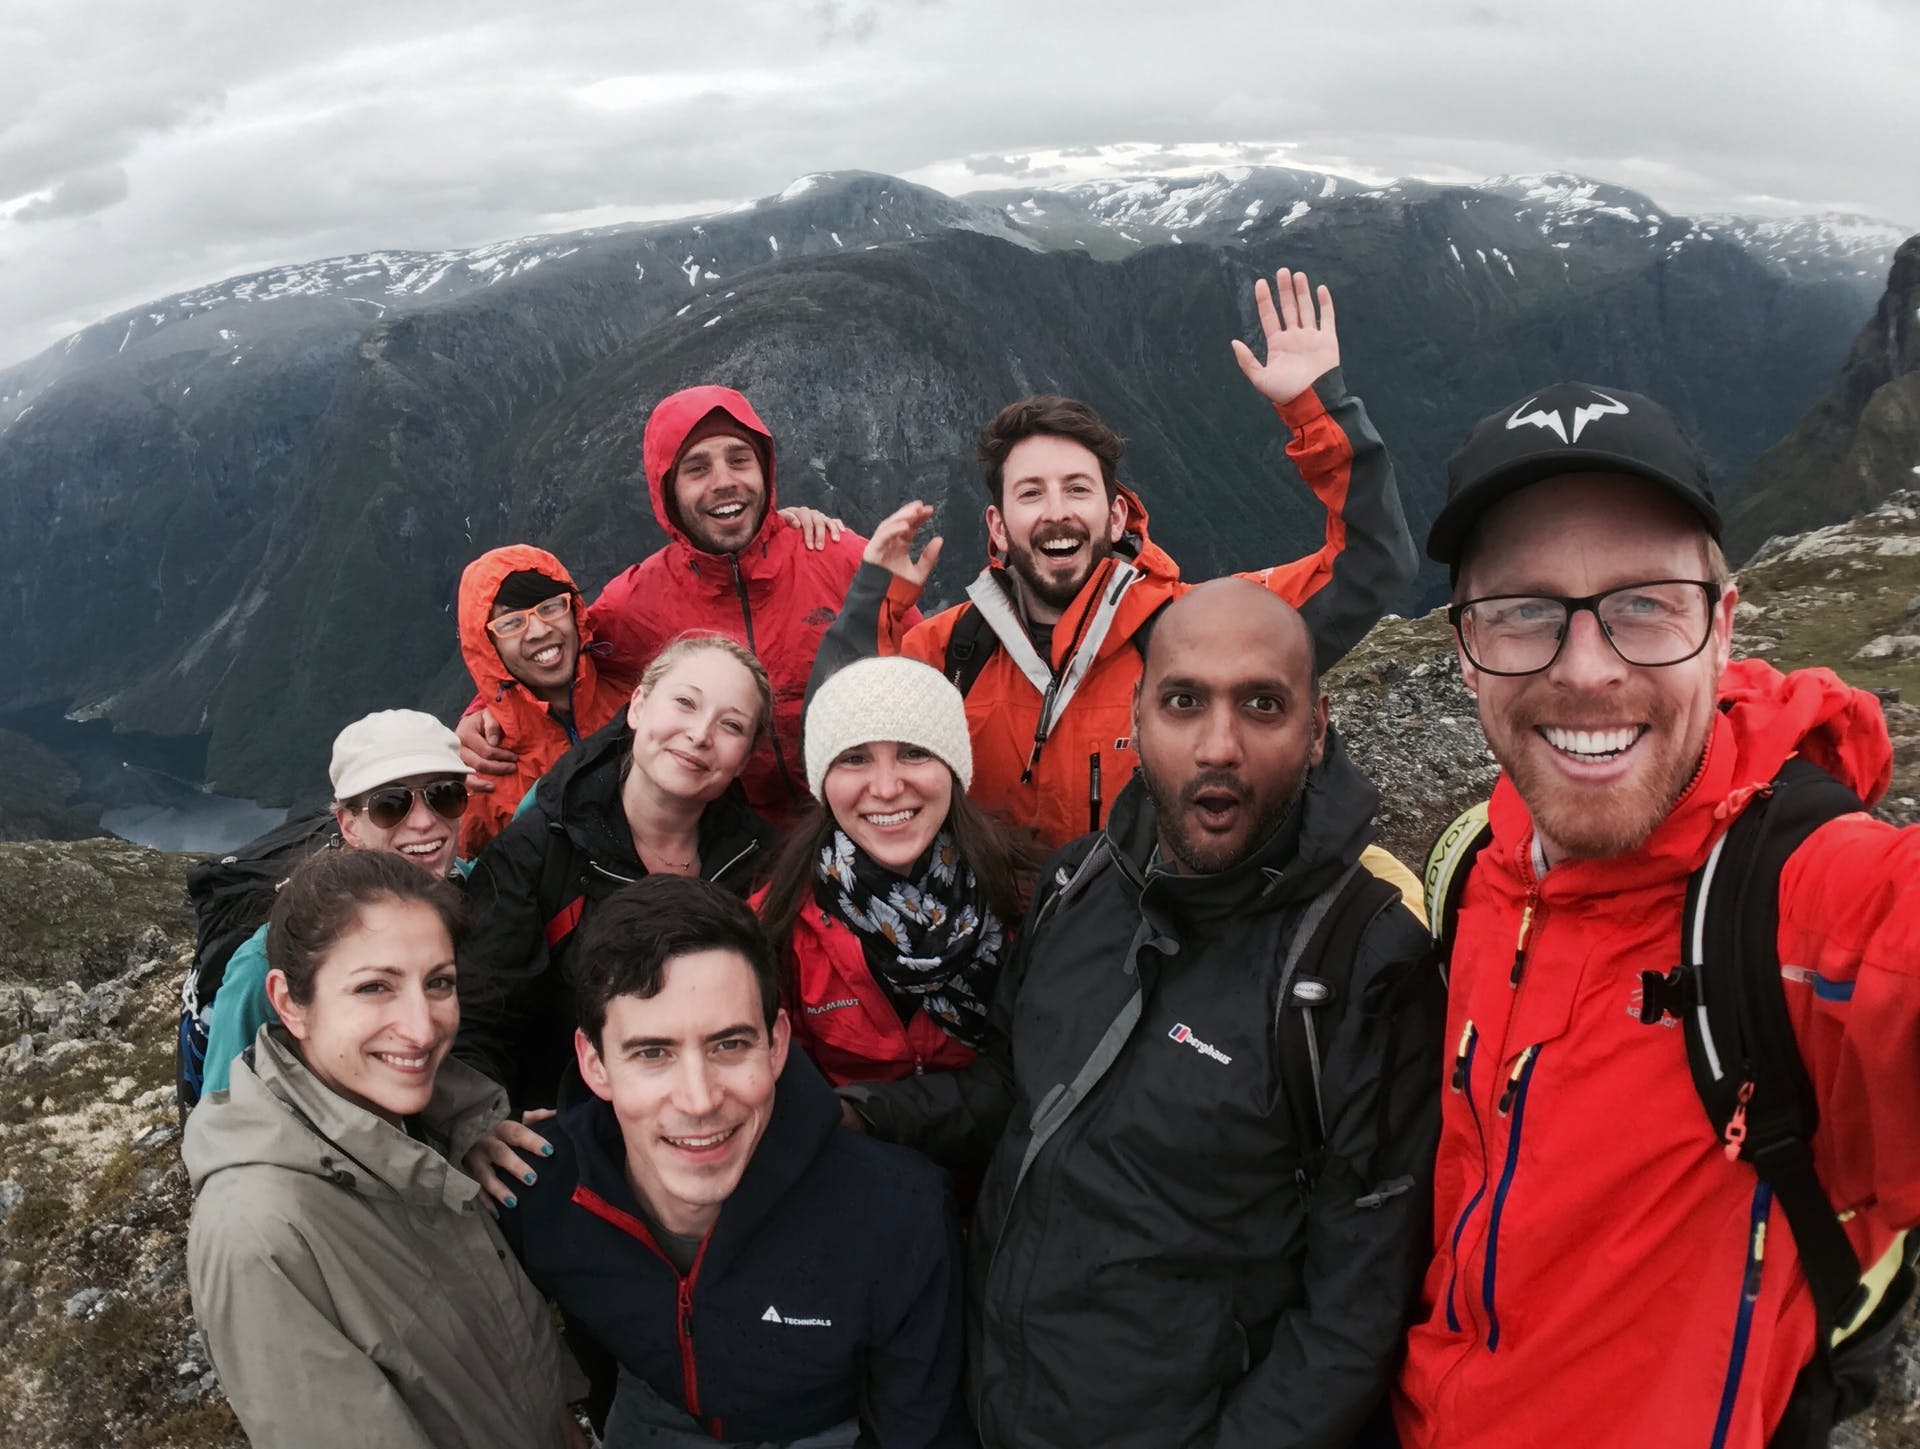 A Much Better Adventures group in Norway. Photo: Much Better Adventures.